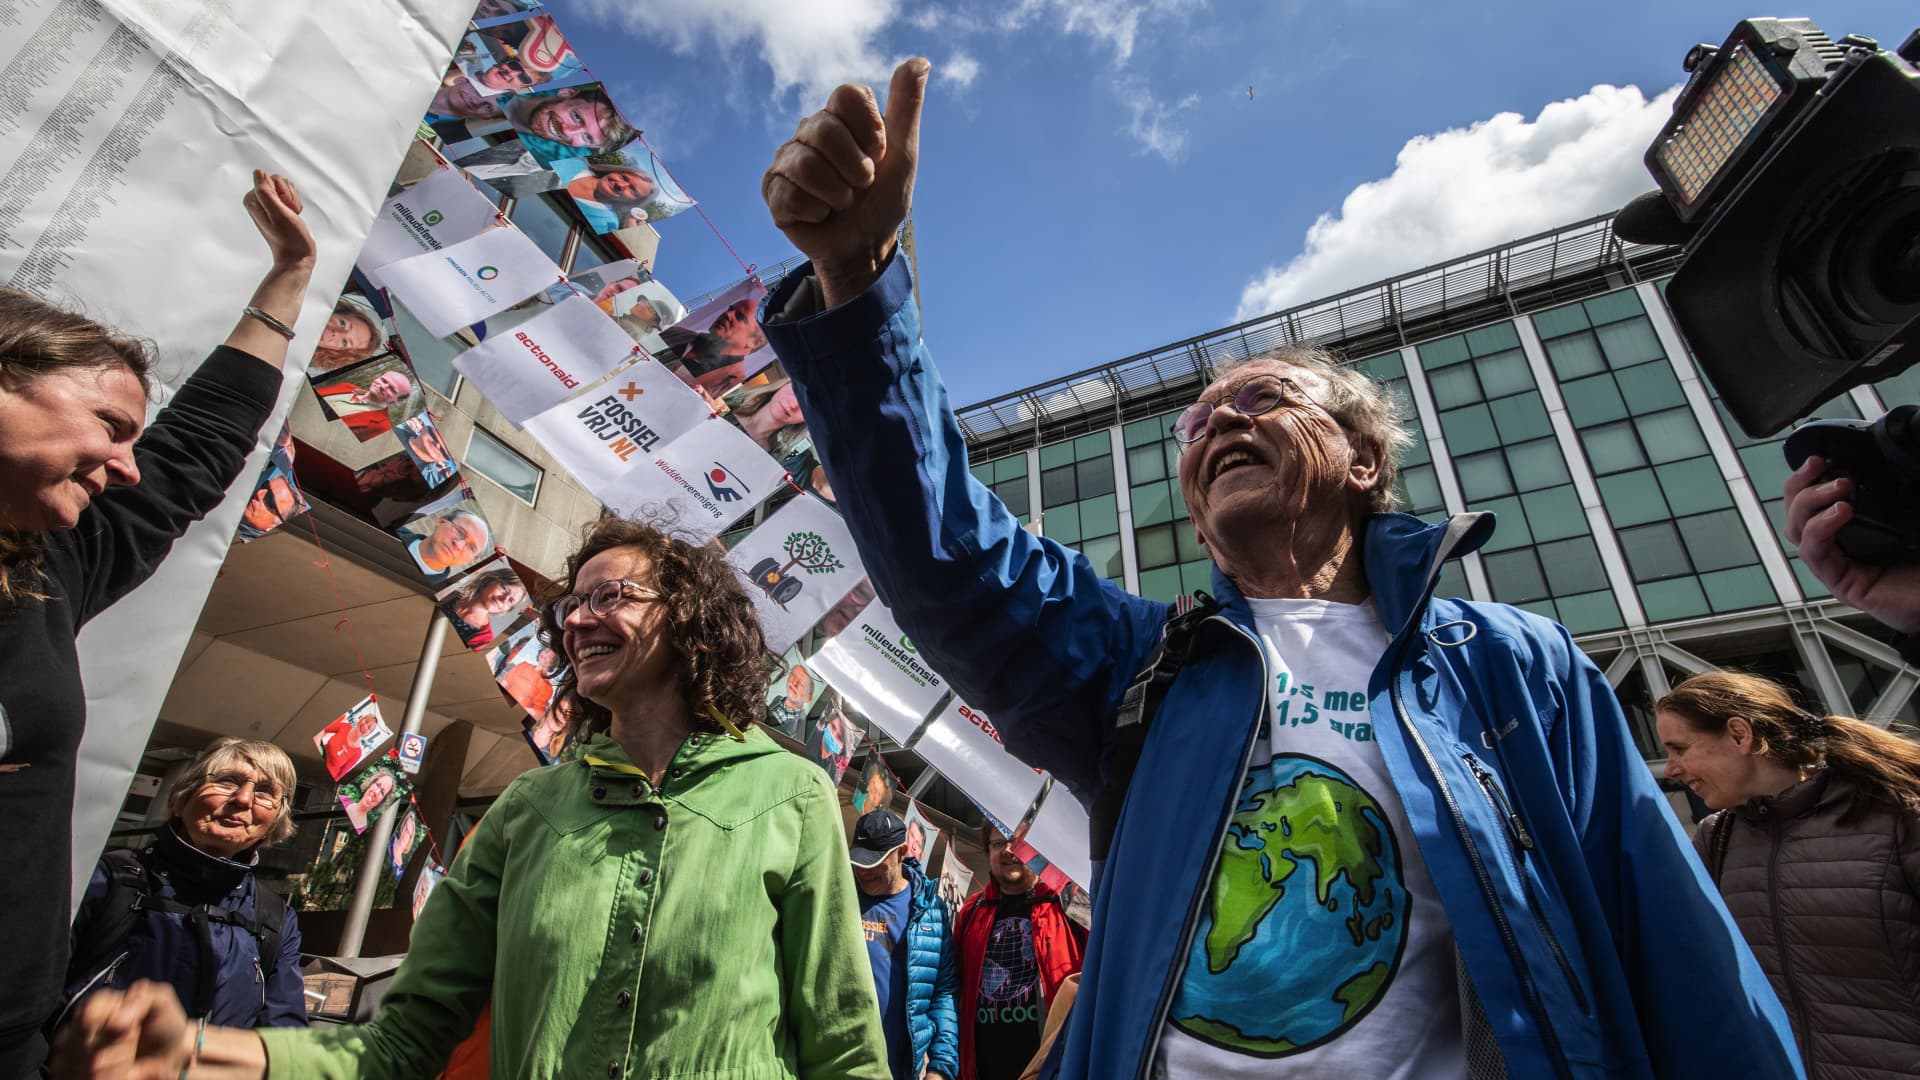 Members of the environmental group MilieuDefensie celebrate the verdict of the Dutch environmental organisation's case against Royal Dutch Shell Plc, outside the Palace of Justice courthouse in The Hague, Netherlands, on Wednesday, May 26, 2021. Shell was ordered by a Dutch court to slash its emissions harder and faster than planned, dealing a blow to the oil giant that could have far reaching consequences for the rest of the global fossil fuel industry.